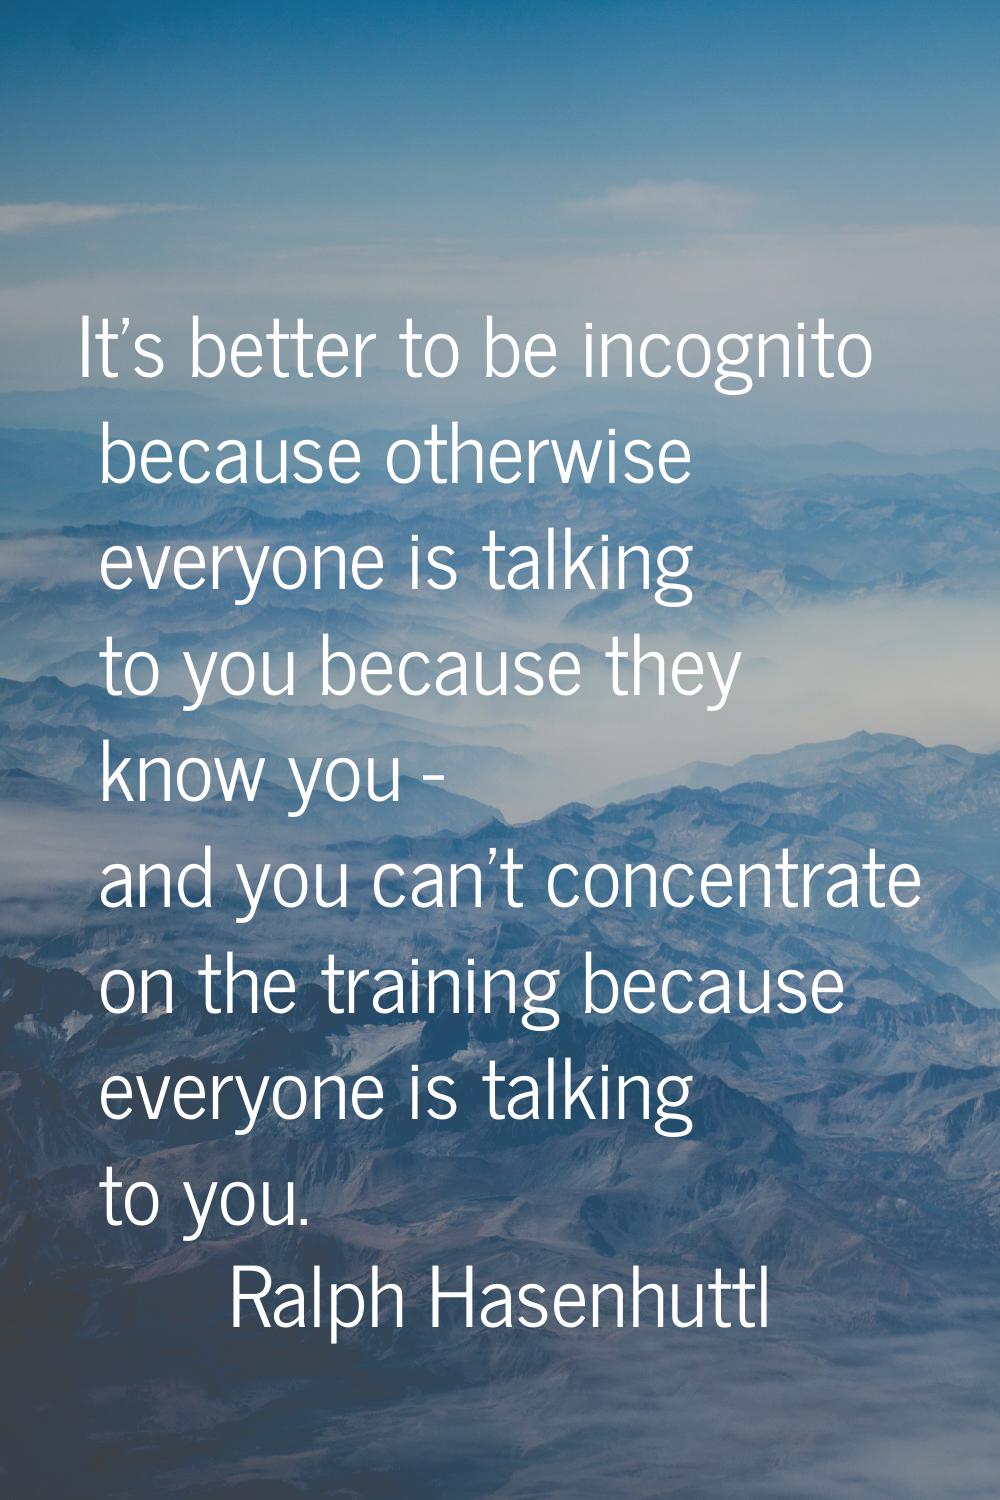 It's better to be incognito because otherwise everyone is talking to you because they know you - an